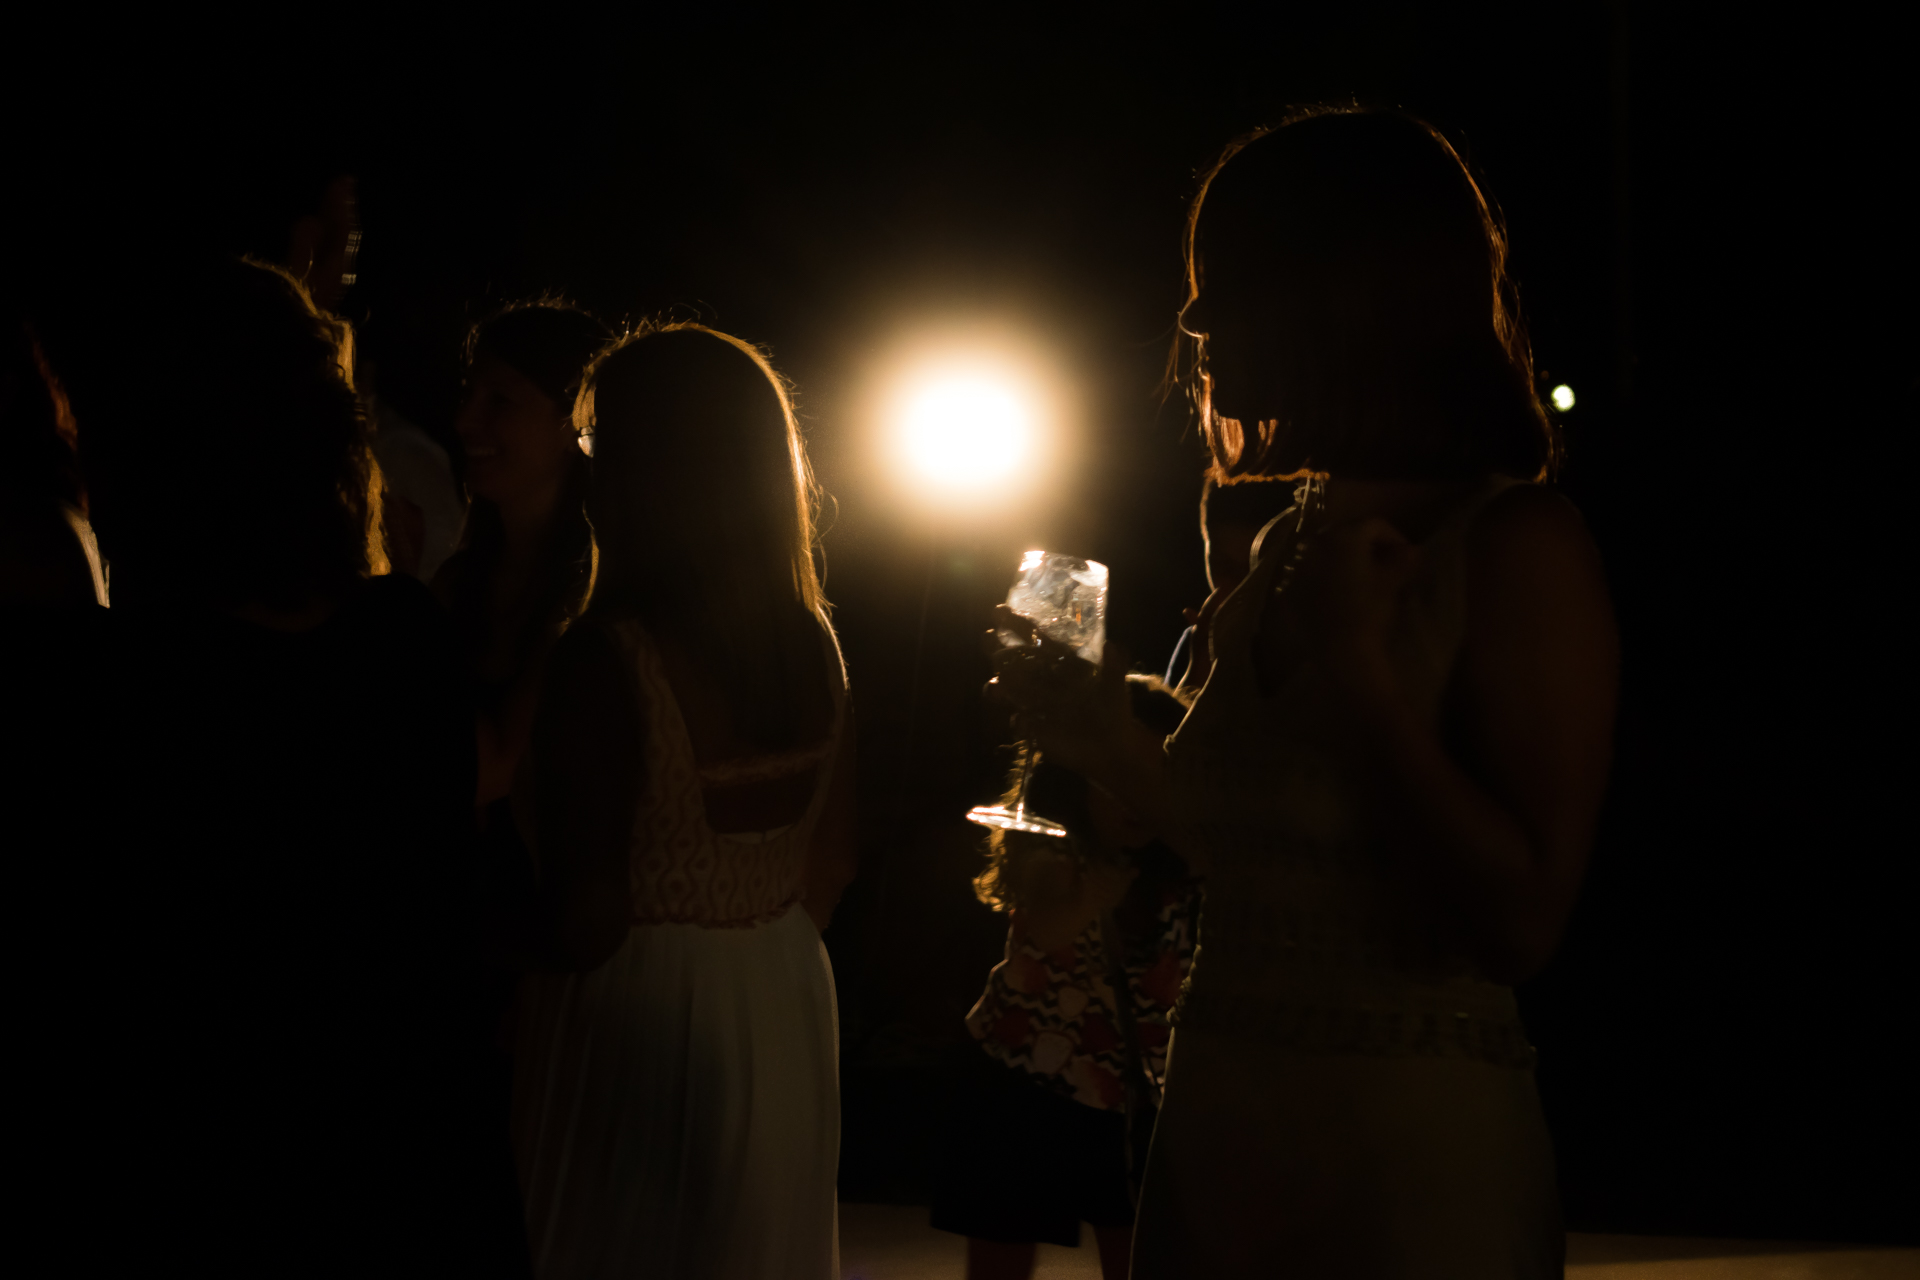 Silhouettes in party...